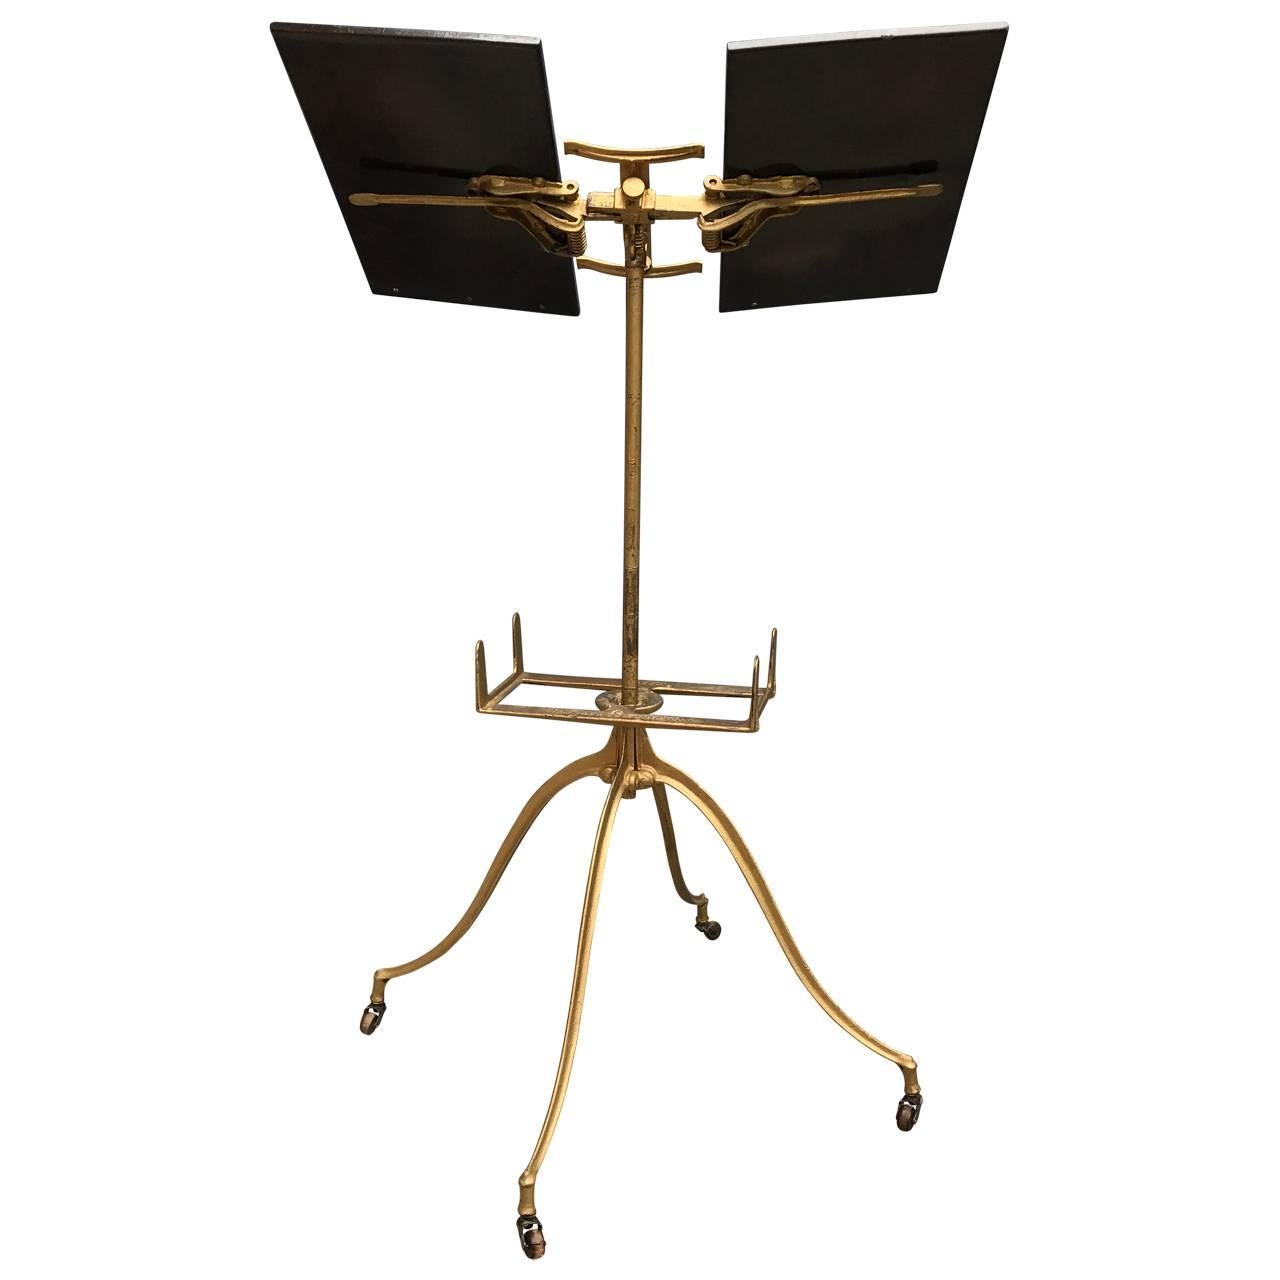 Painted Early 20th Century Gilded Metal And Wood Music Stand